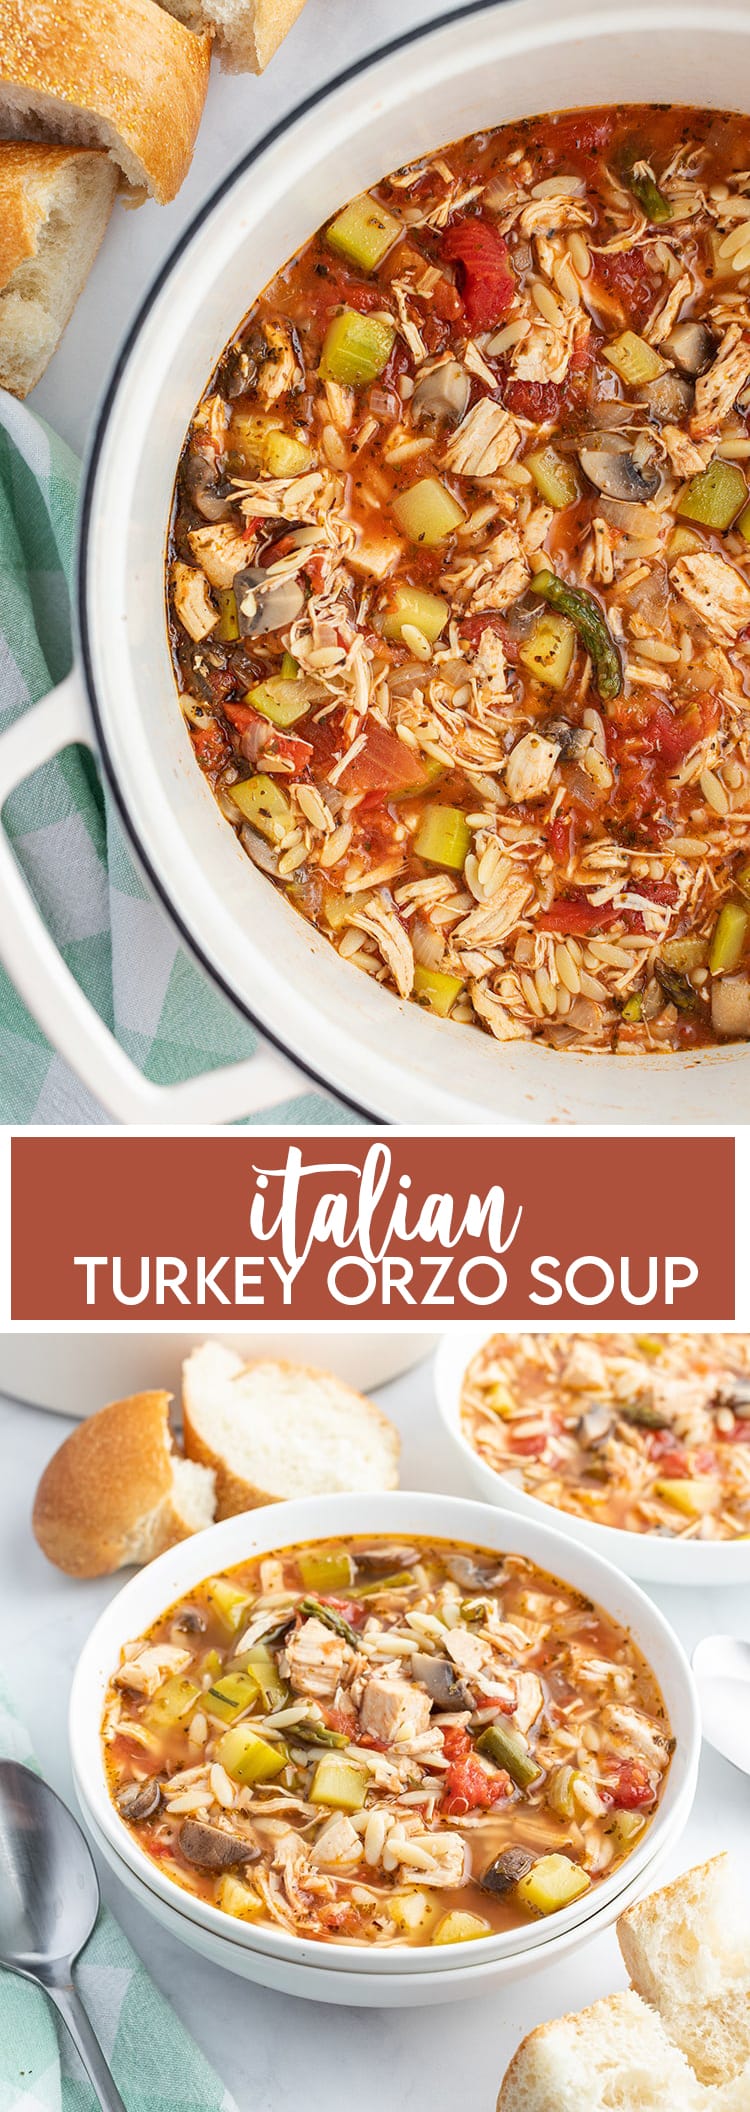 A collage of two photos of Italian Turkey Orzo soup. The first is the soup in a pot. The second is a small bowlful of soup with bread behind the bowl.